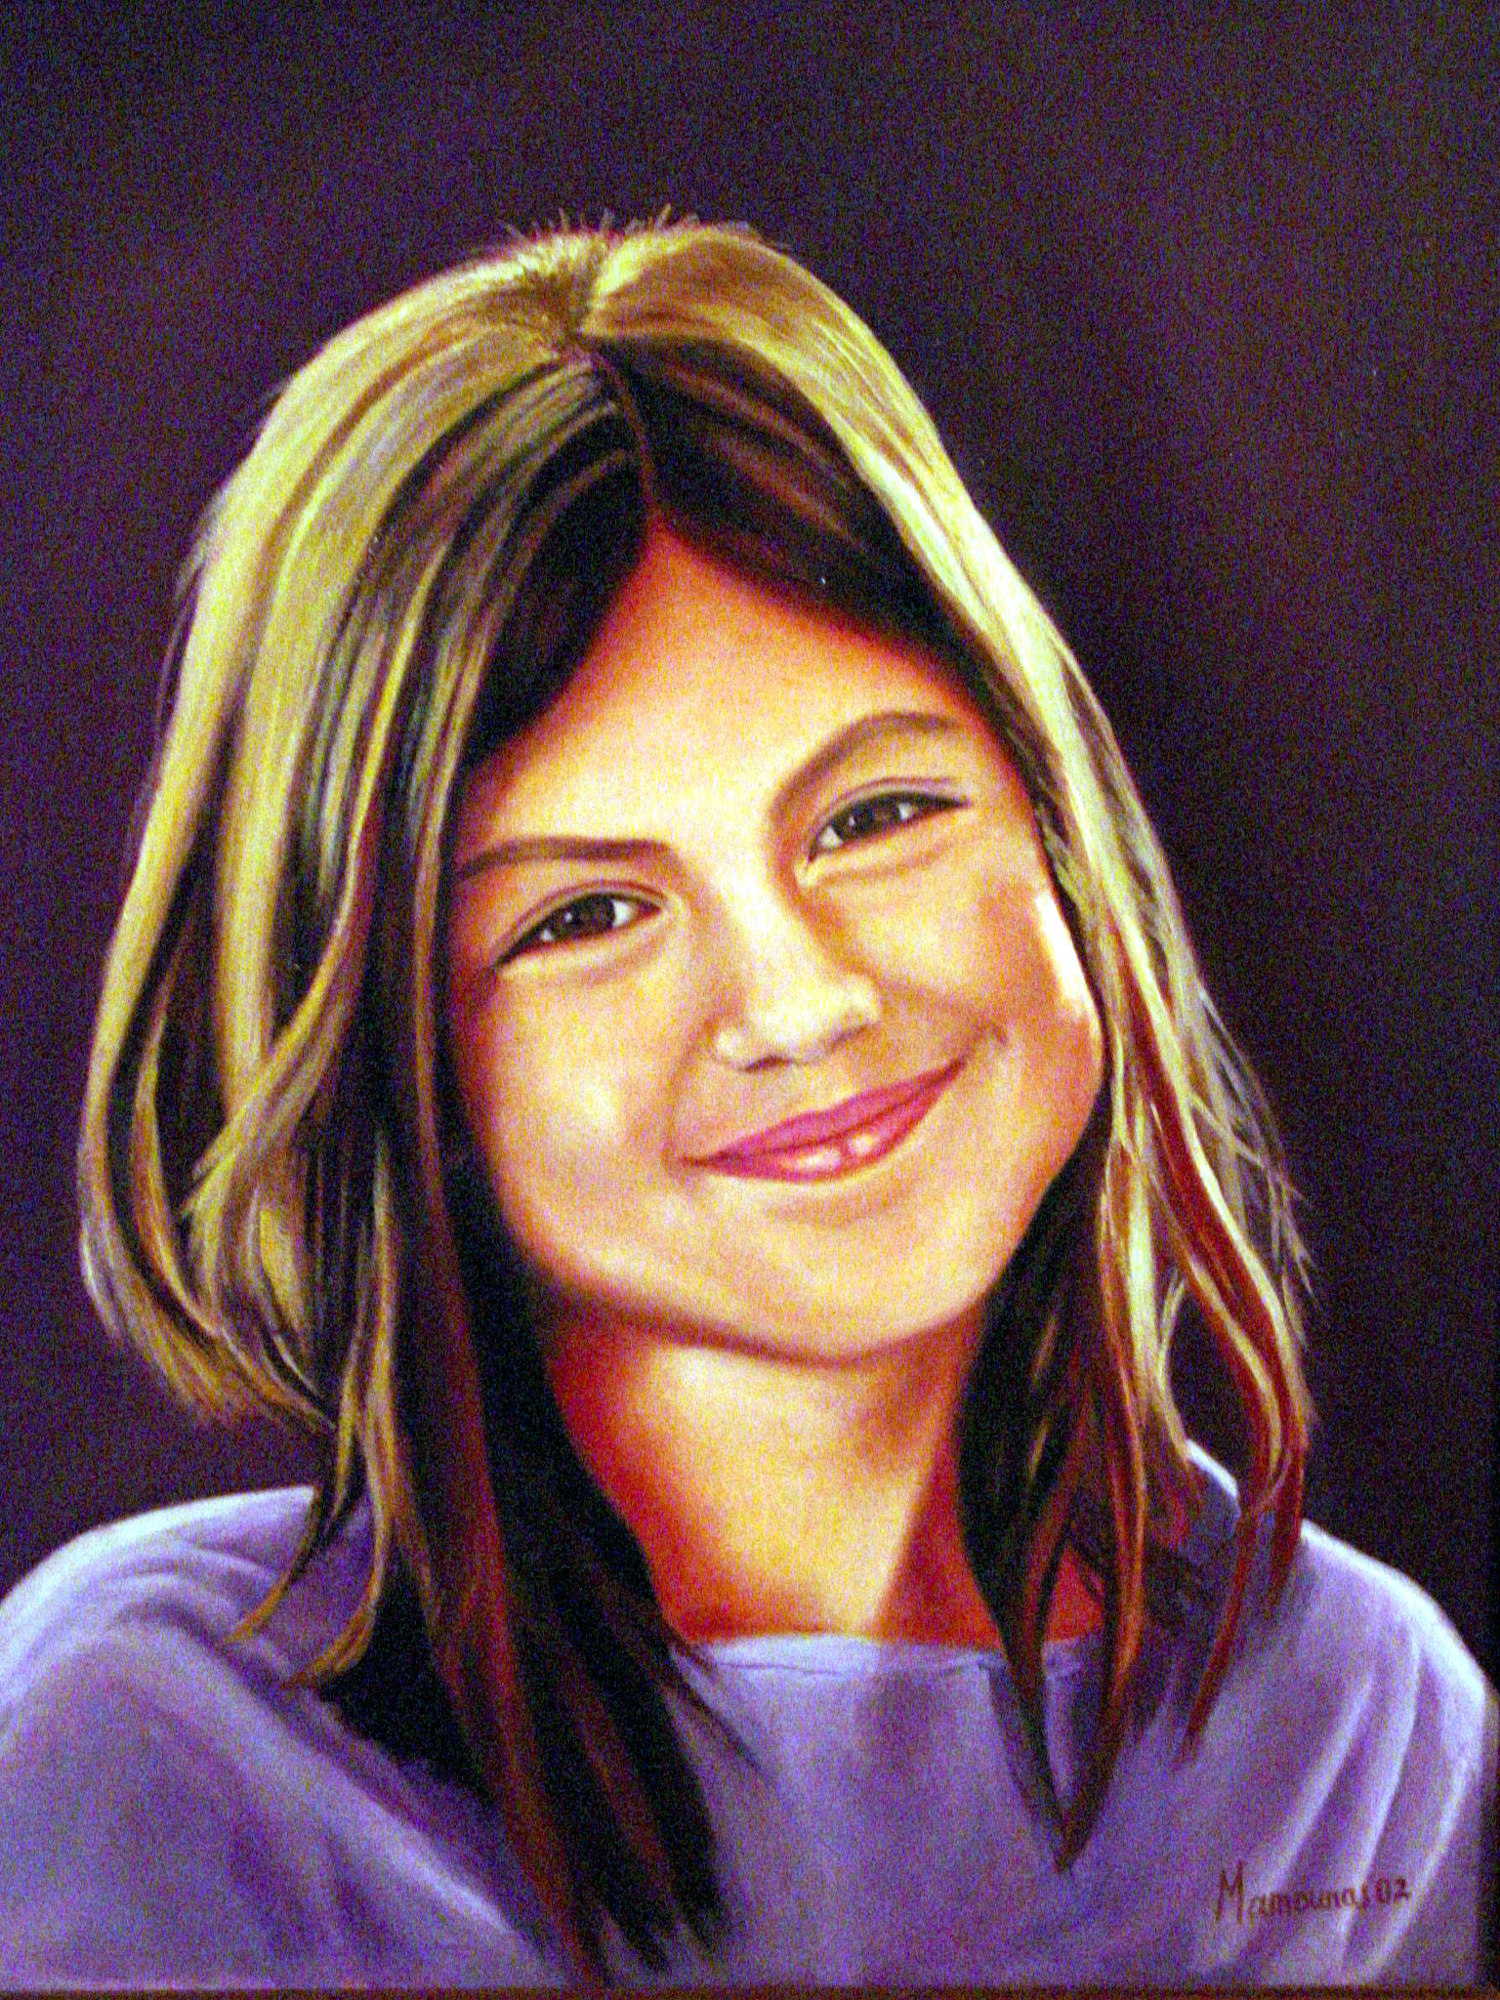 Dr. Terry Mamounas has many paintings of his family, including this portrait of his daughter.